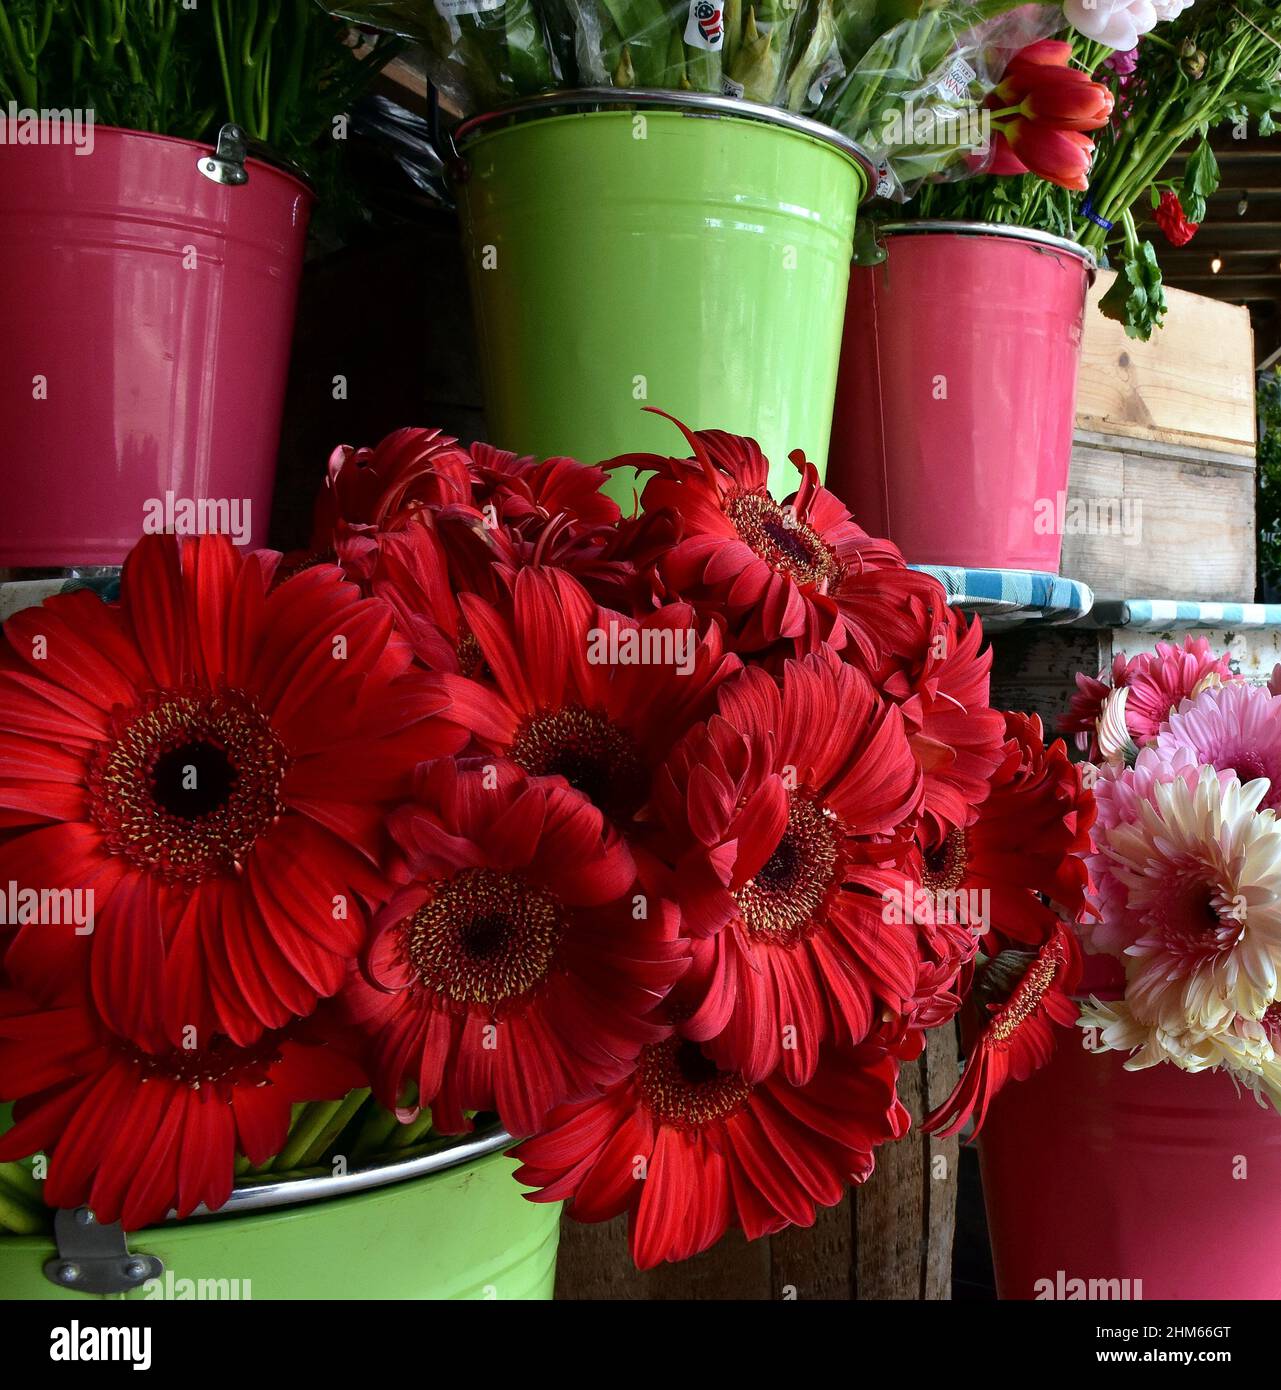 Flower Market Close Up with Flowers, Pink and Lime Green Containers and Wood Box Shelves Stock Photo